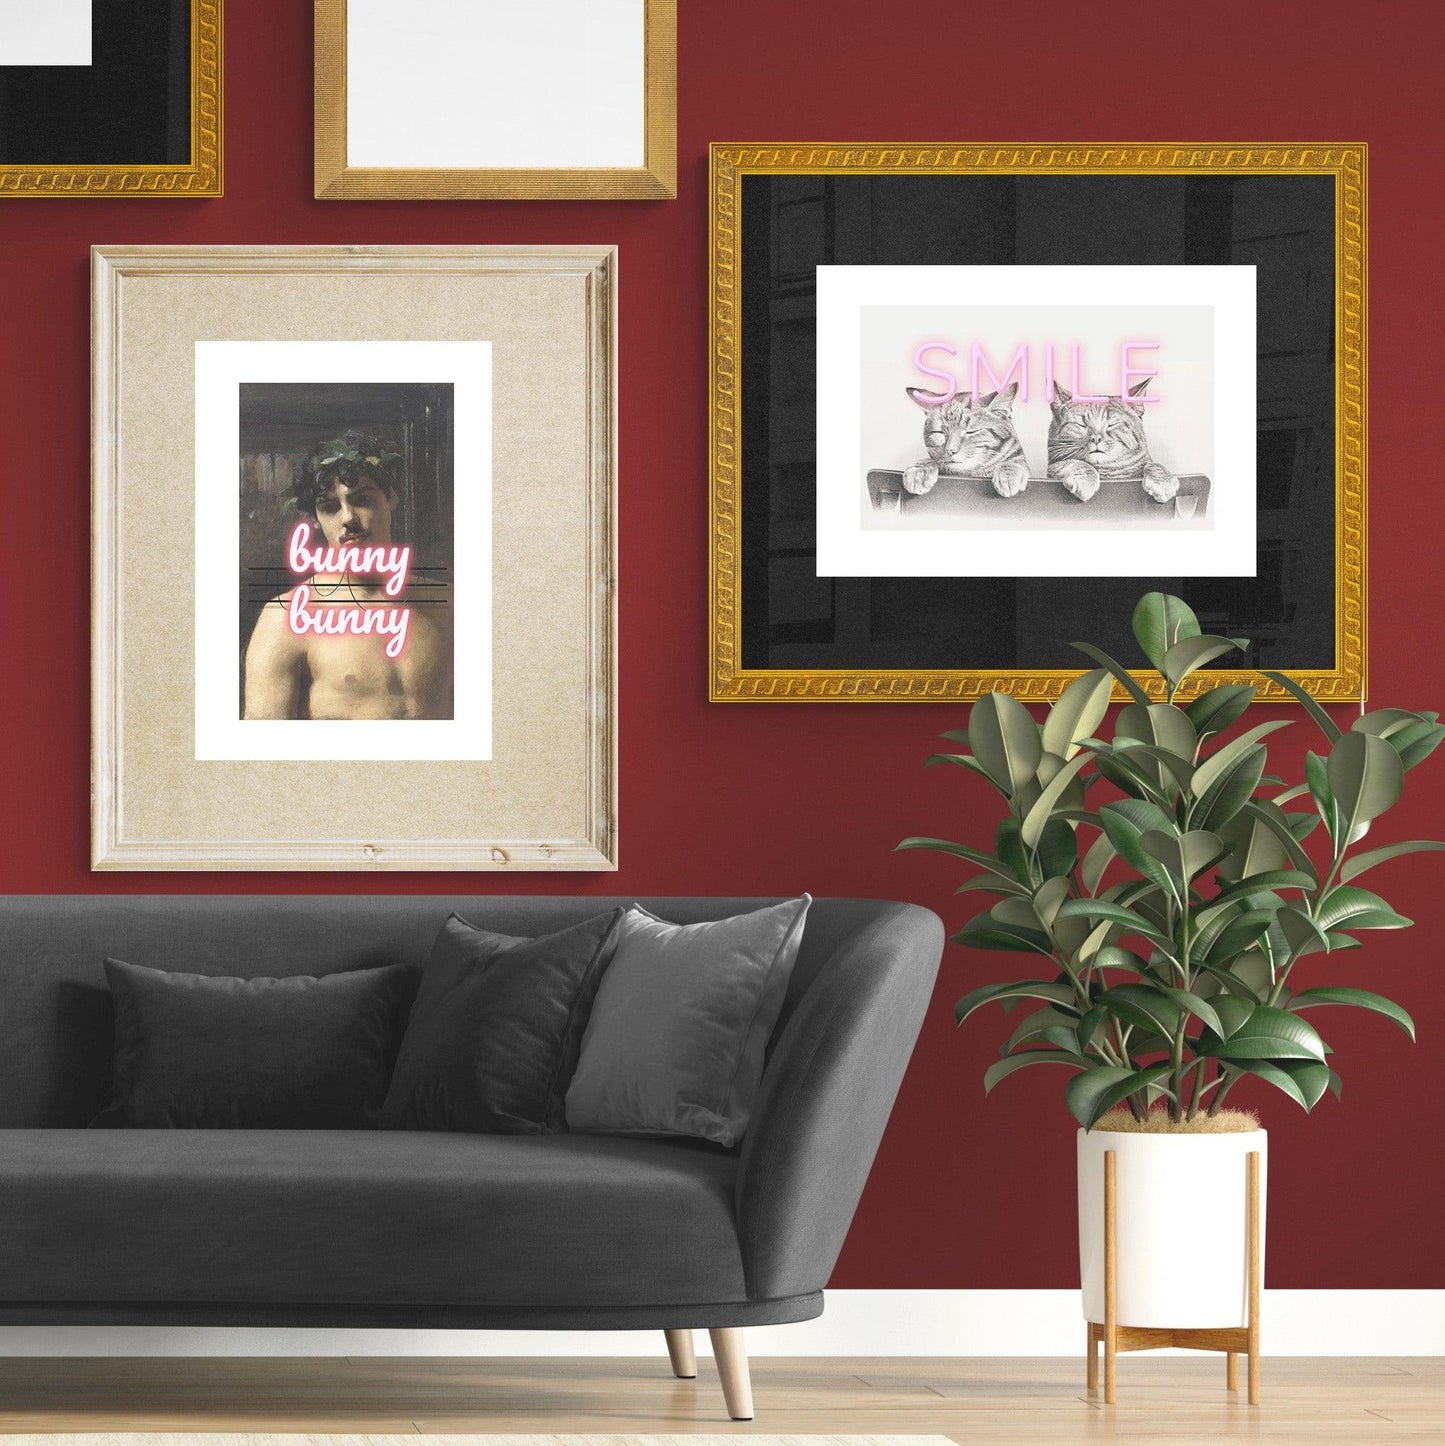 Graphic illustration of Cats by Thomas Hunter. Original from Library of Congress, they are Smile. This beautiful, bright illustration will add just the right amount of color to your home!